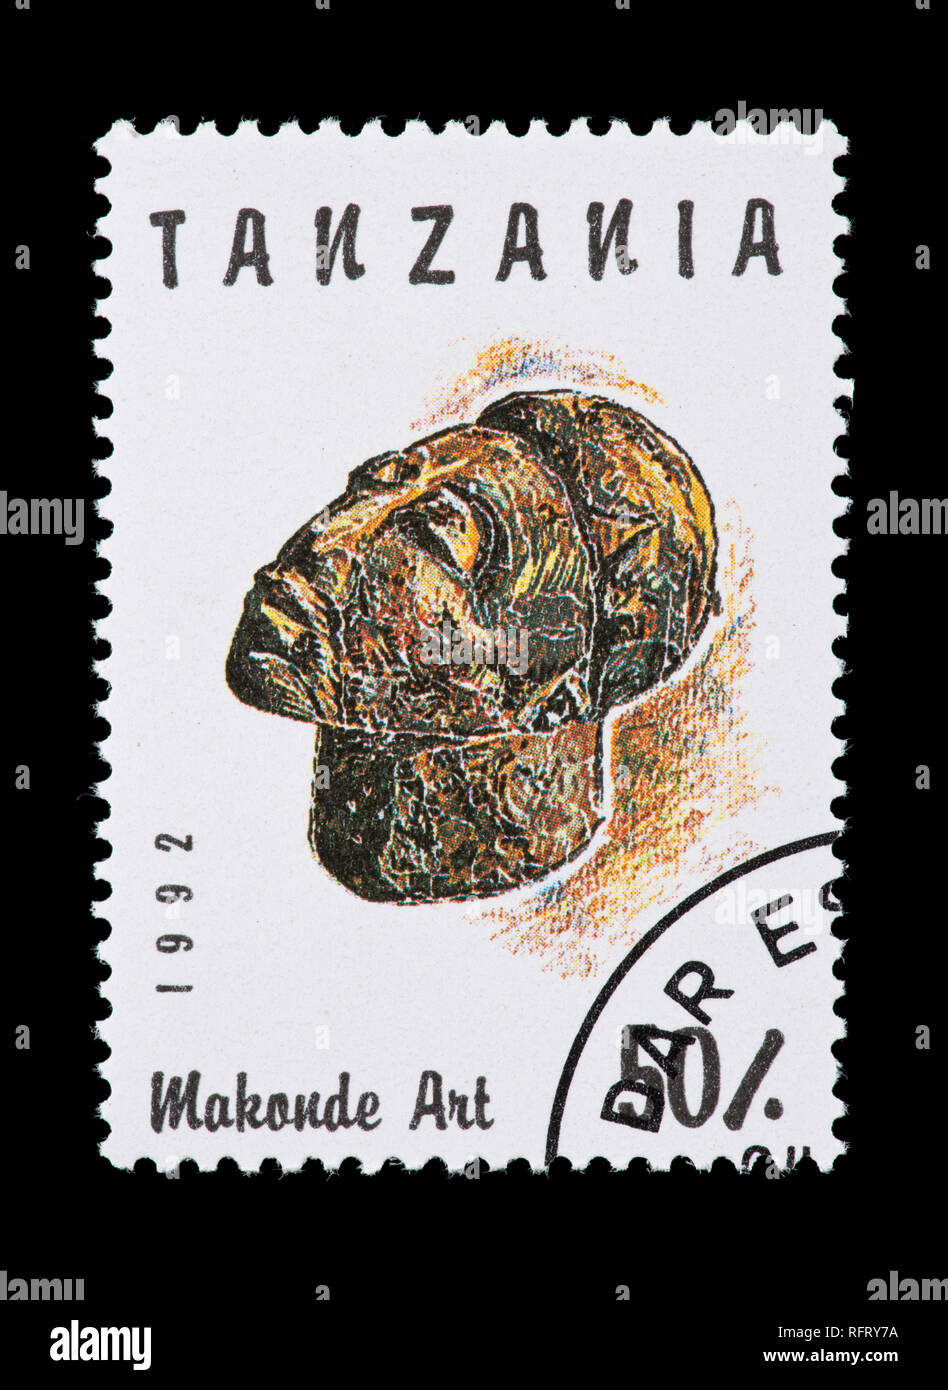 Postage stamp from Tanzania depicting a carved face, example of Makonde art. Stock Photo